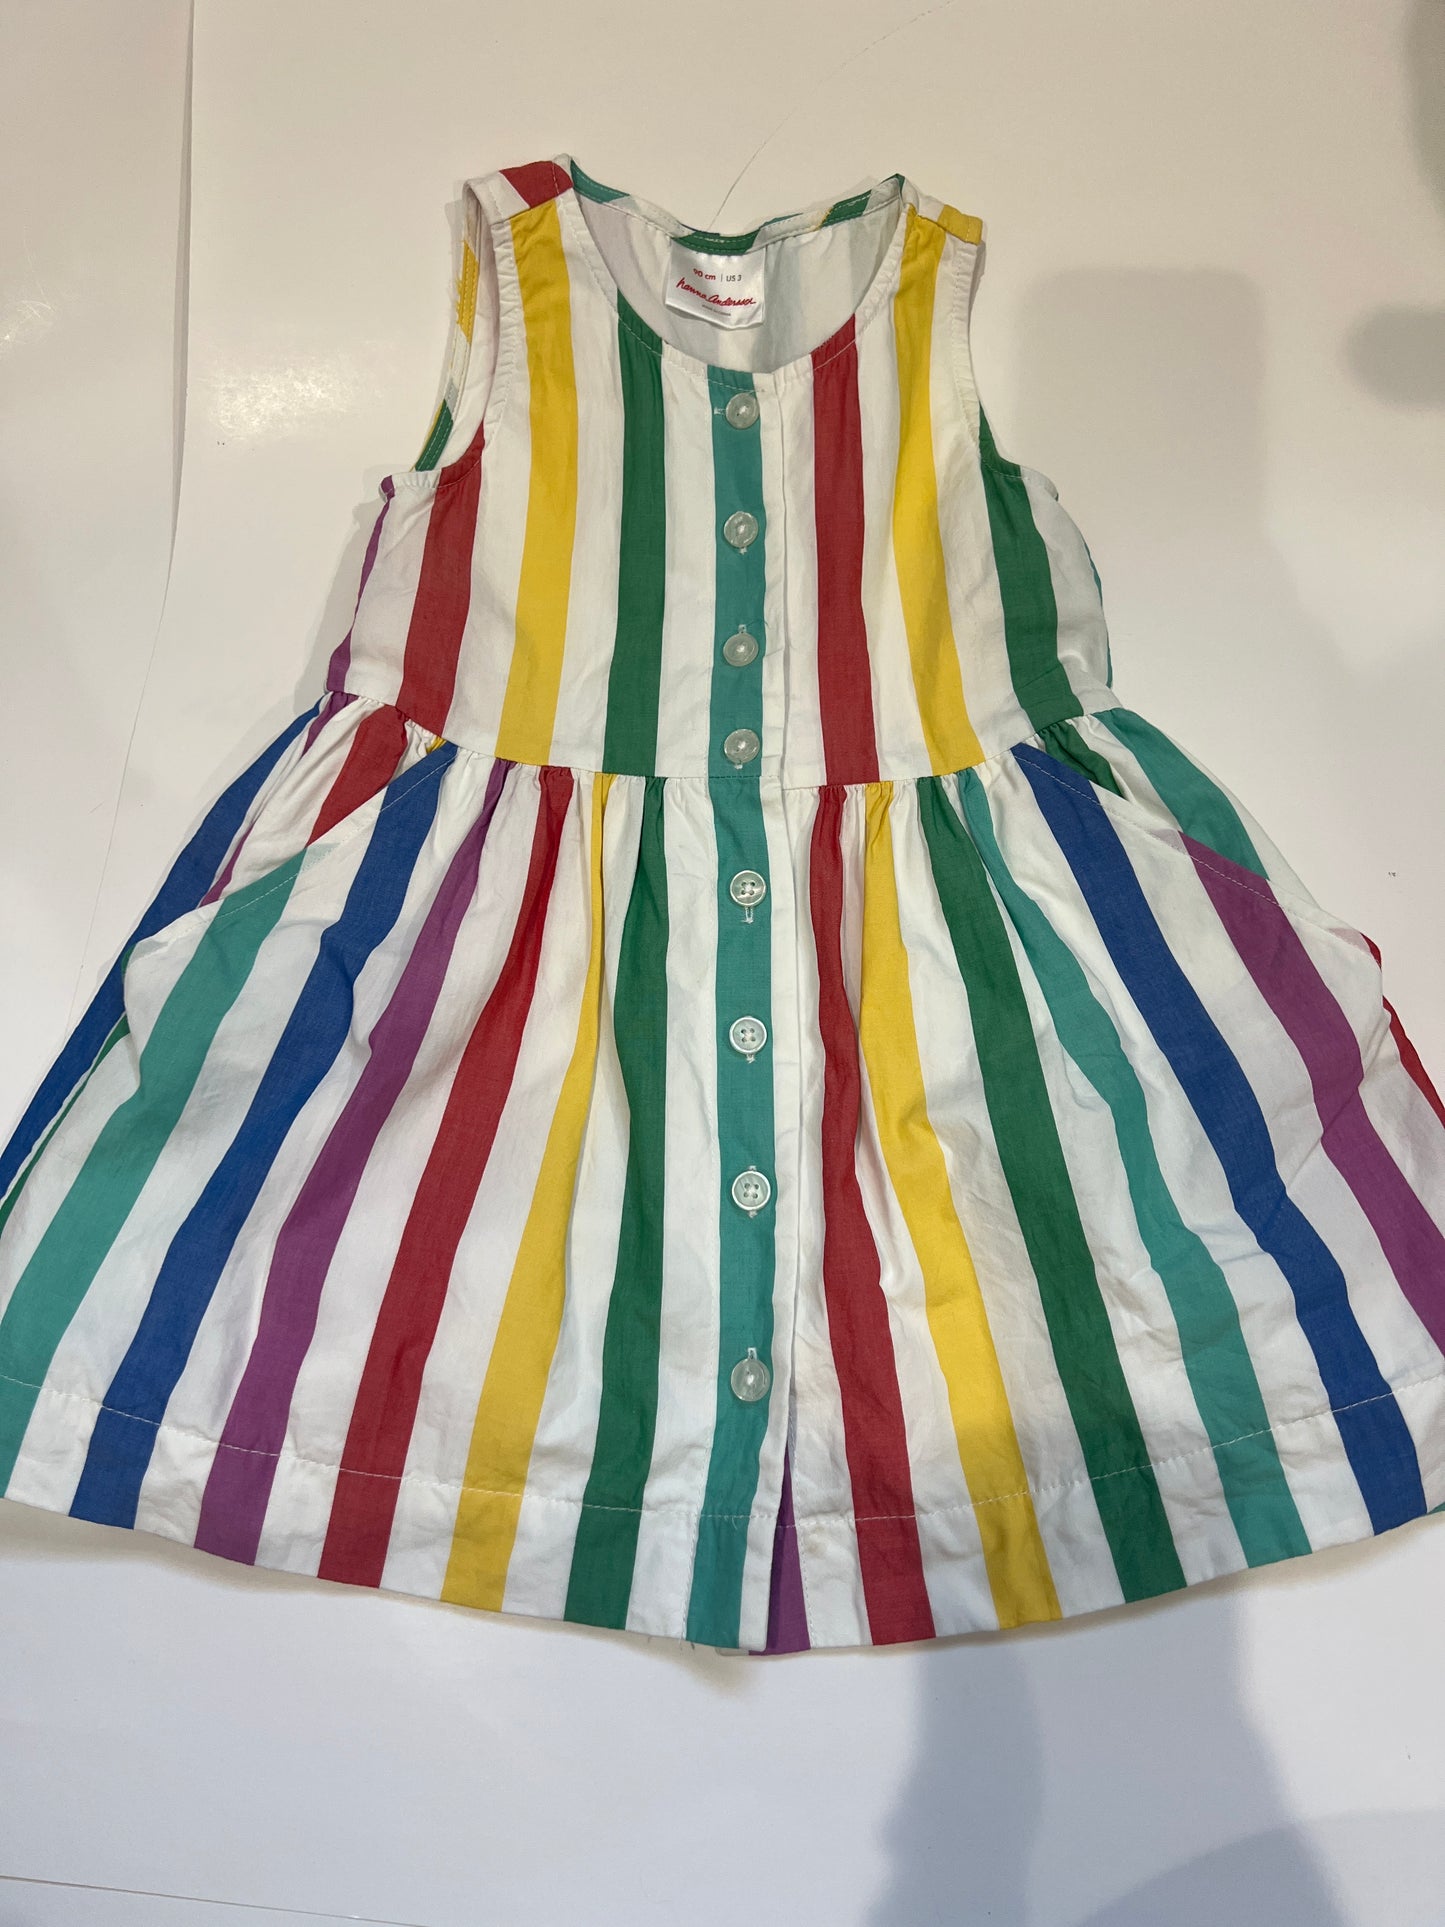 Hanna Andersson stripe dress with pockets - like new condition - seriously the cutest PPU 45230